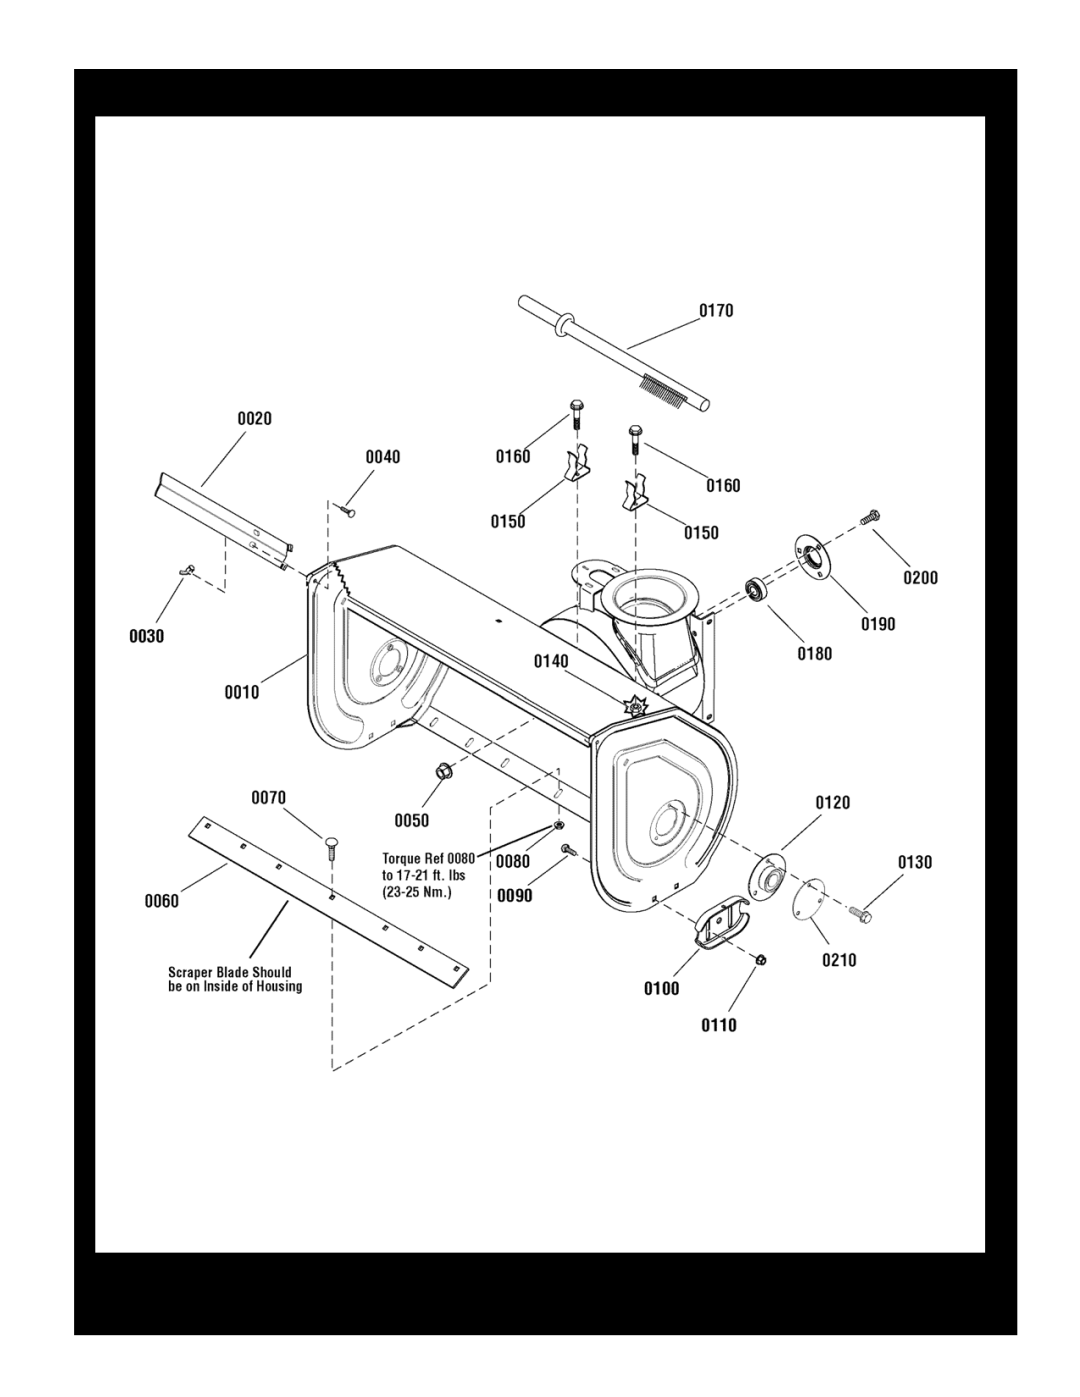 Snapper 1696004, 1696011, 1696012 manual Auger Housing Group, Reproduction, Manual No, 7105286, 26, 28 & 30 TWO STAGE, 2011 